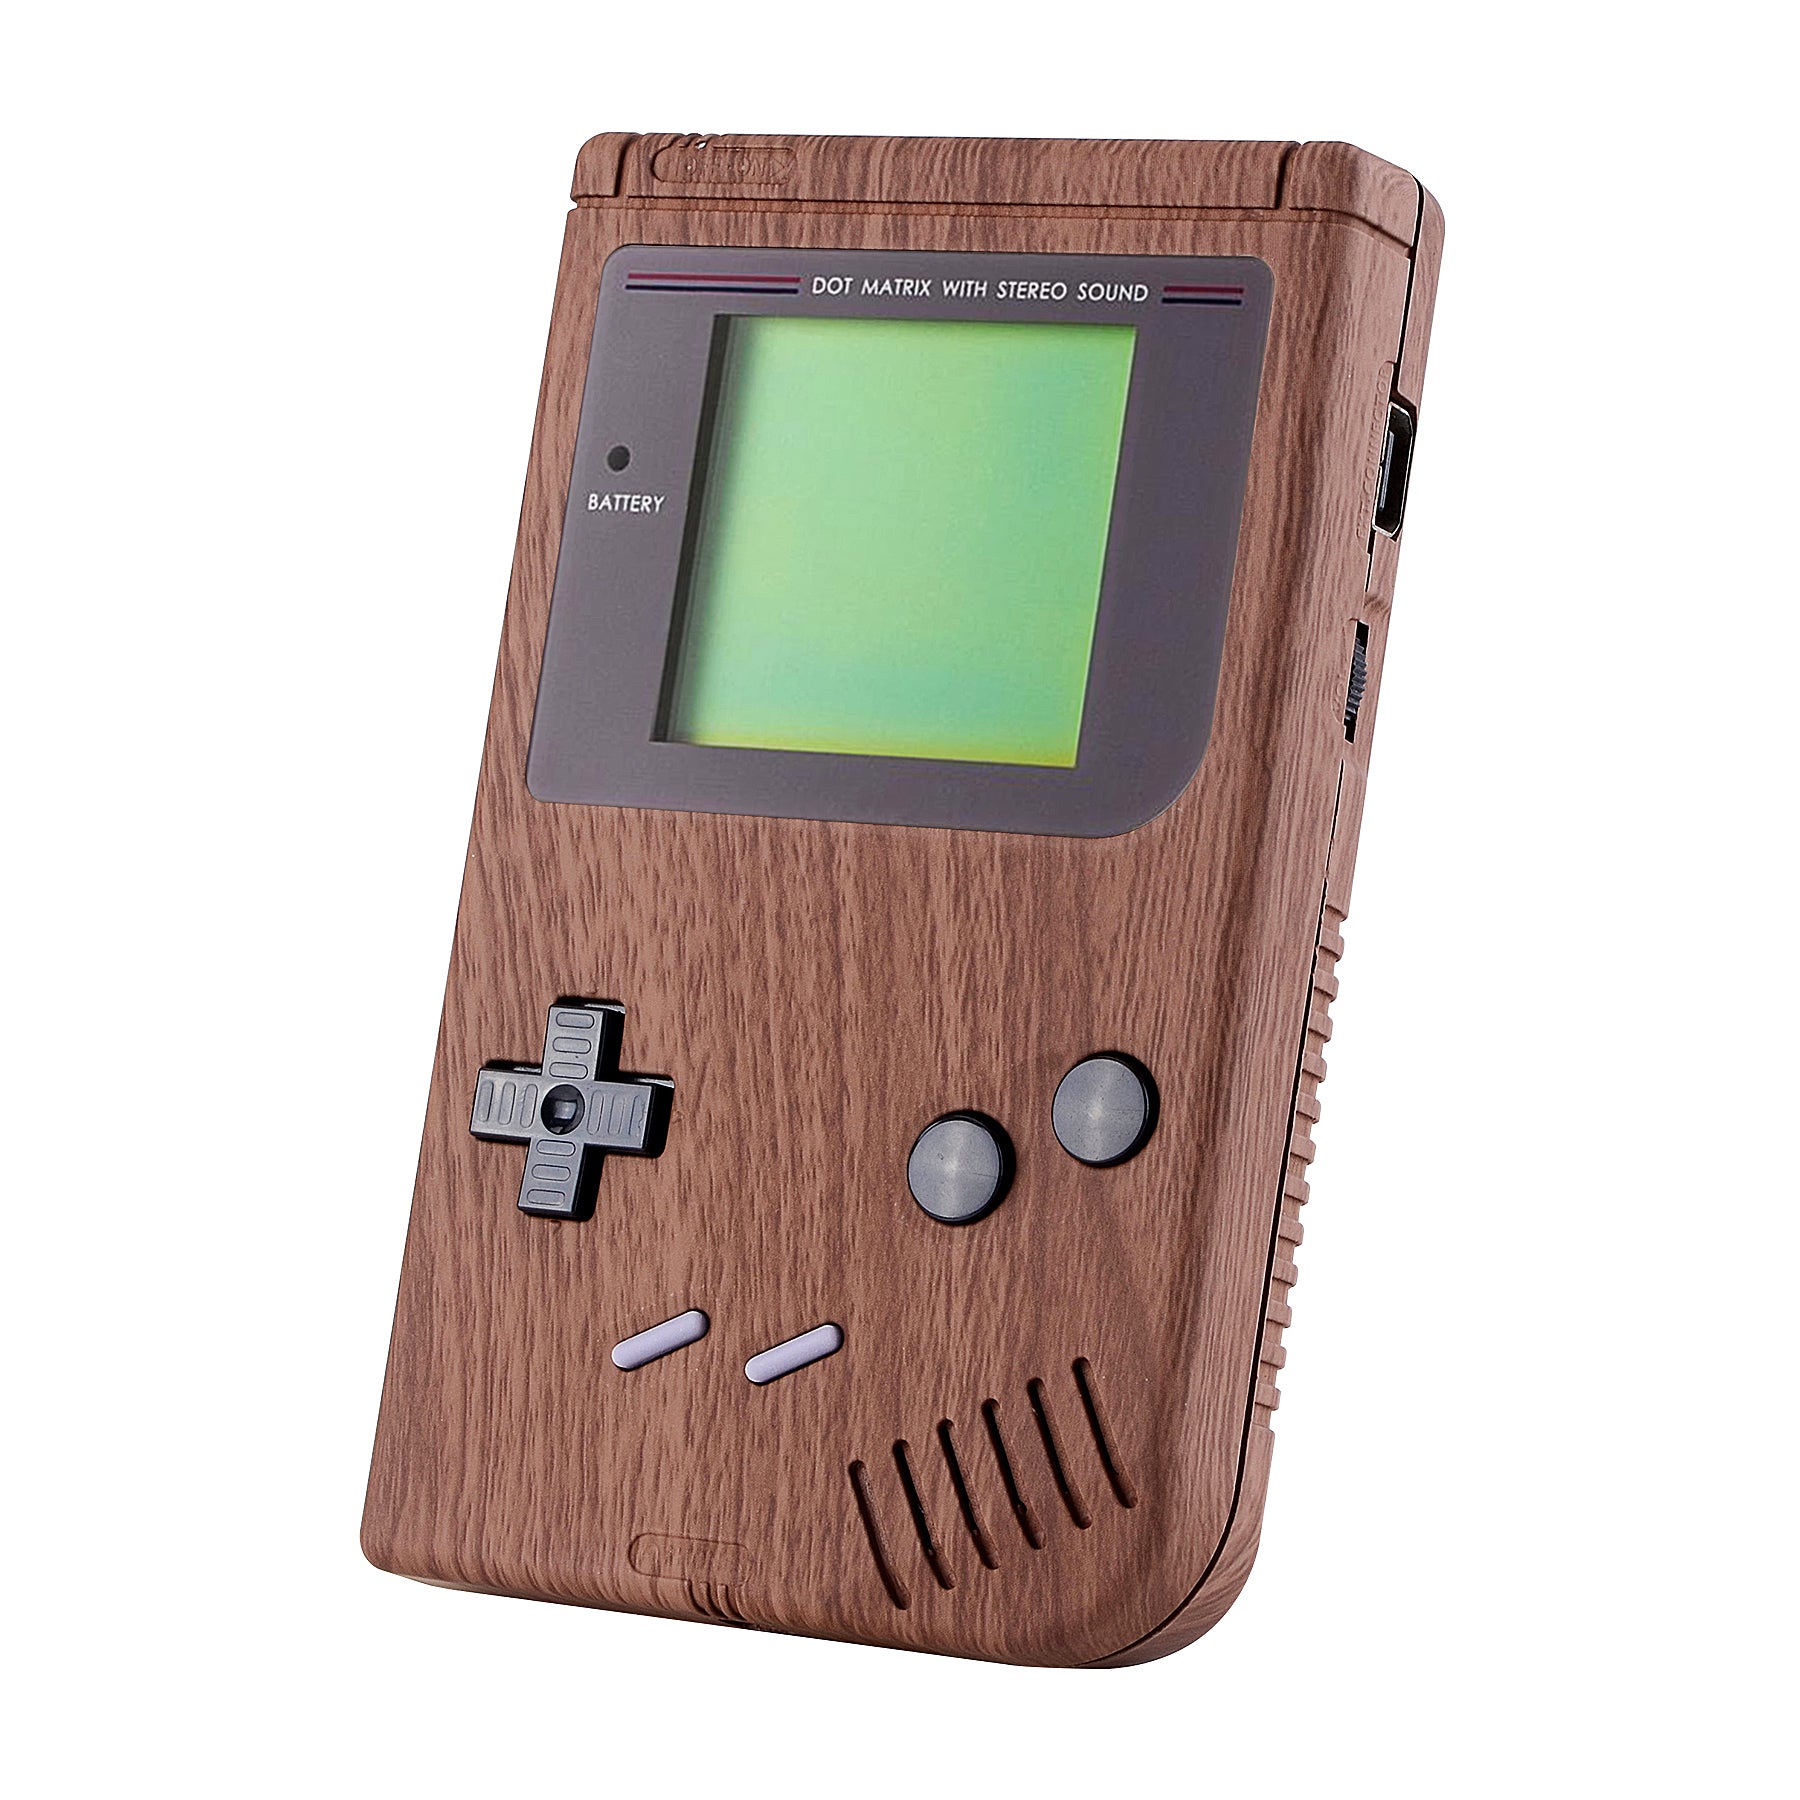 eXtremeRate Retail Wood Grain Soft Touch Case Cover Replacement Full Housing Shell for Gameboy Classic 1989 GB DMG-01 Console with w/ Screen Lens & Buttons Kit - Handheld Game Console NOT Included - GBFS201